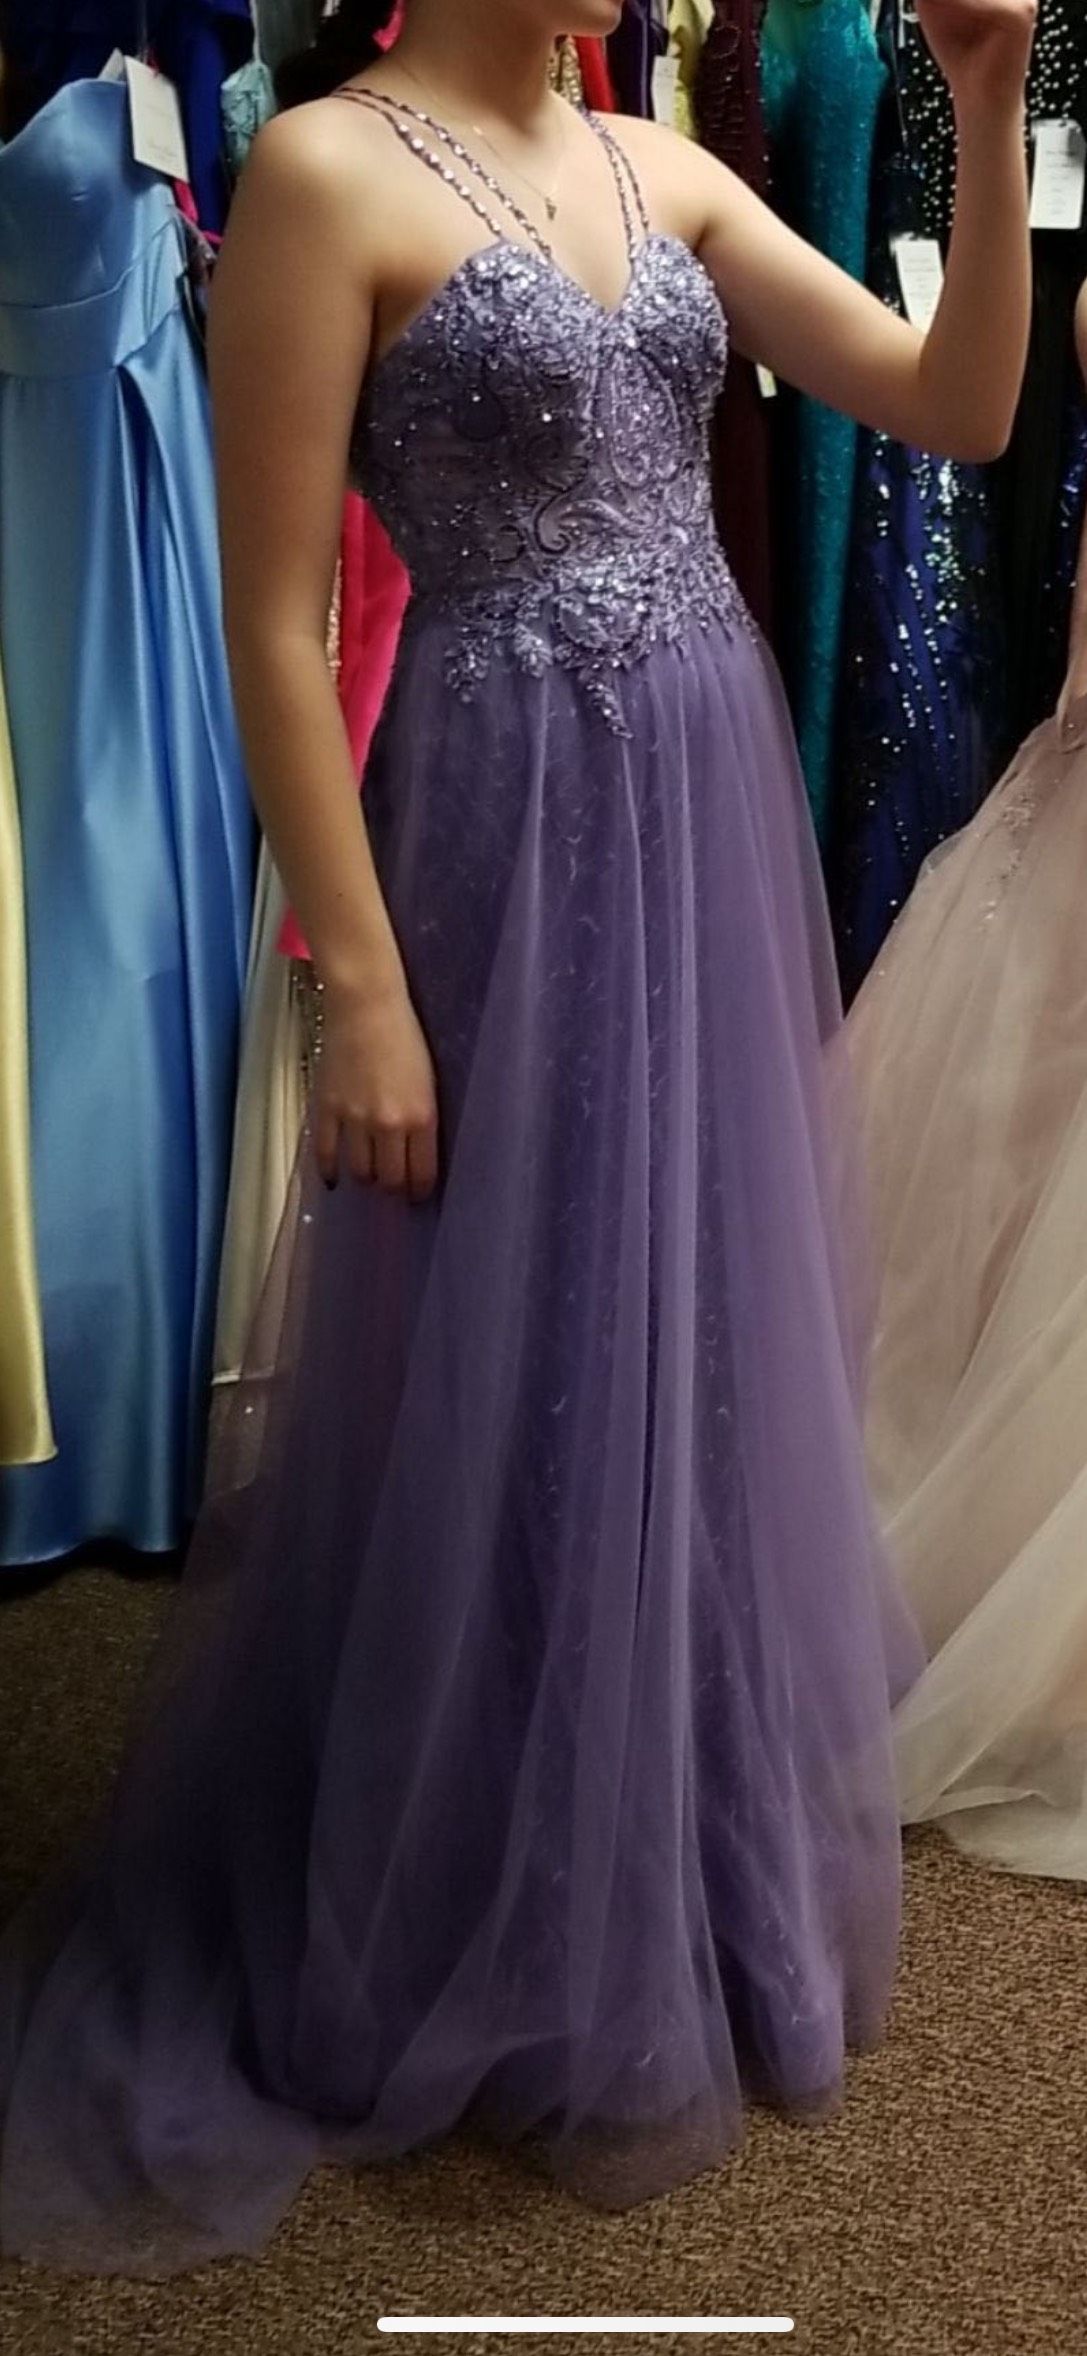 Size 0 Prom Purple A-line Dress on Queenly